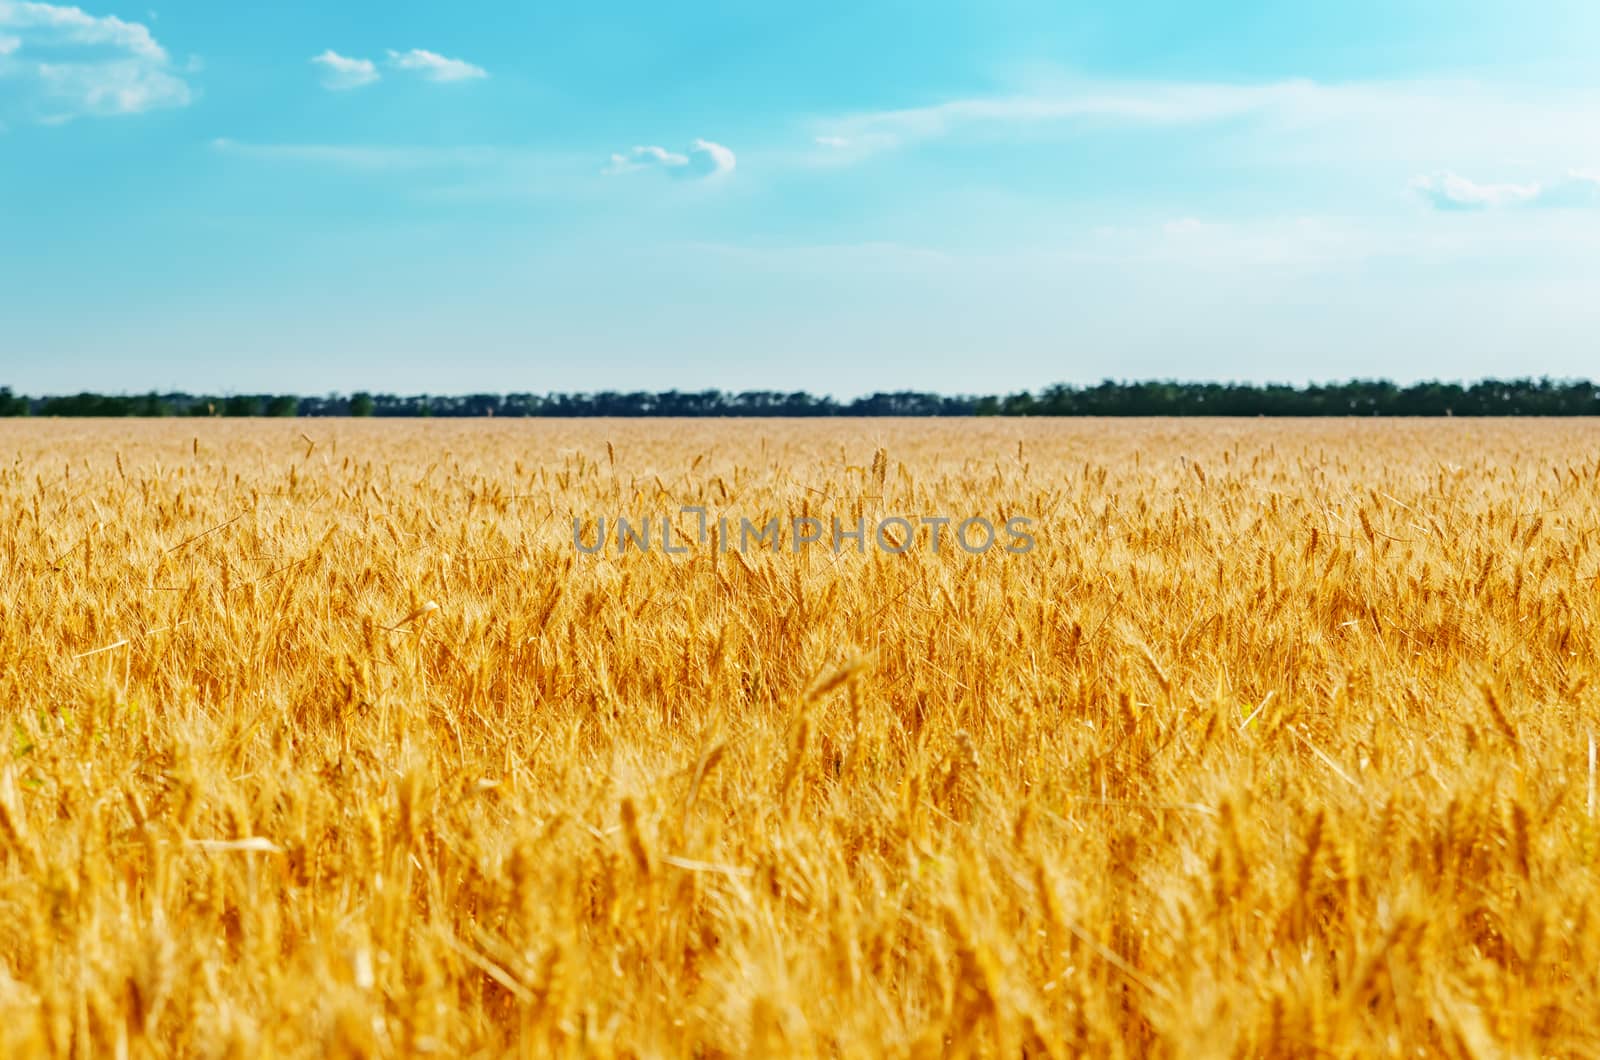 field with golden harvest and blue sky. soft focus on center of image